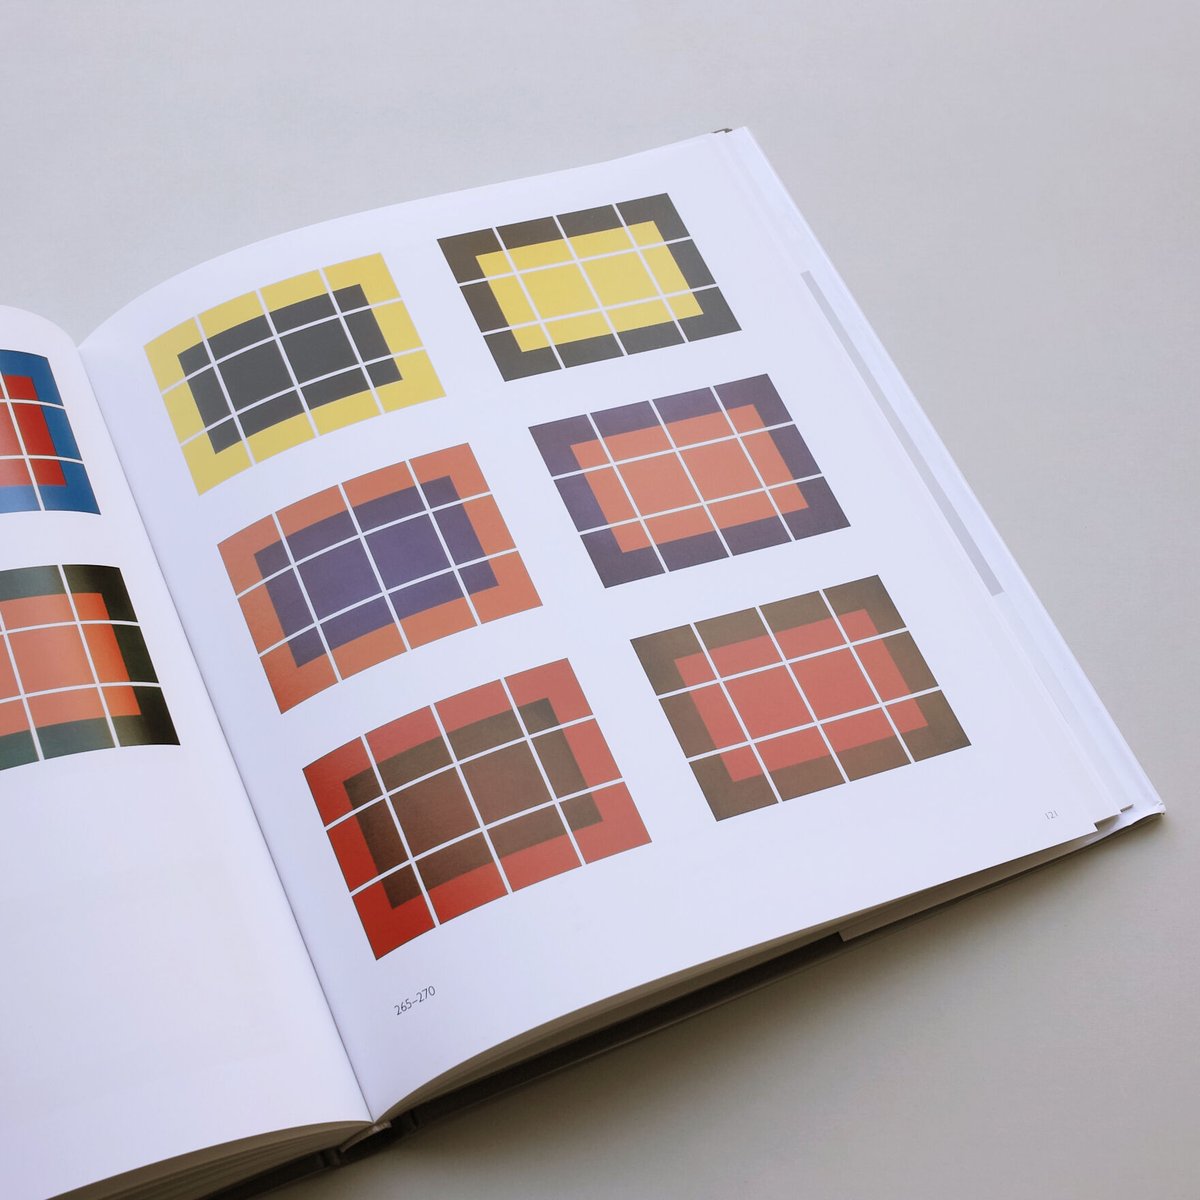 Donald Judd / Prints and Works in Editions | POST